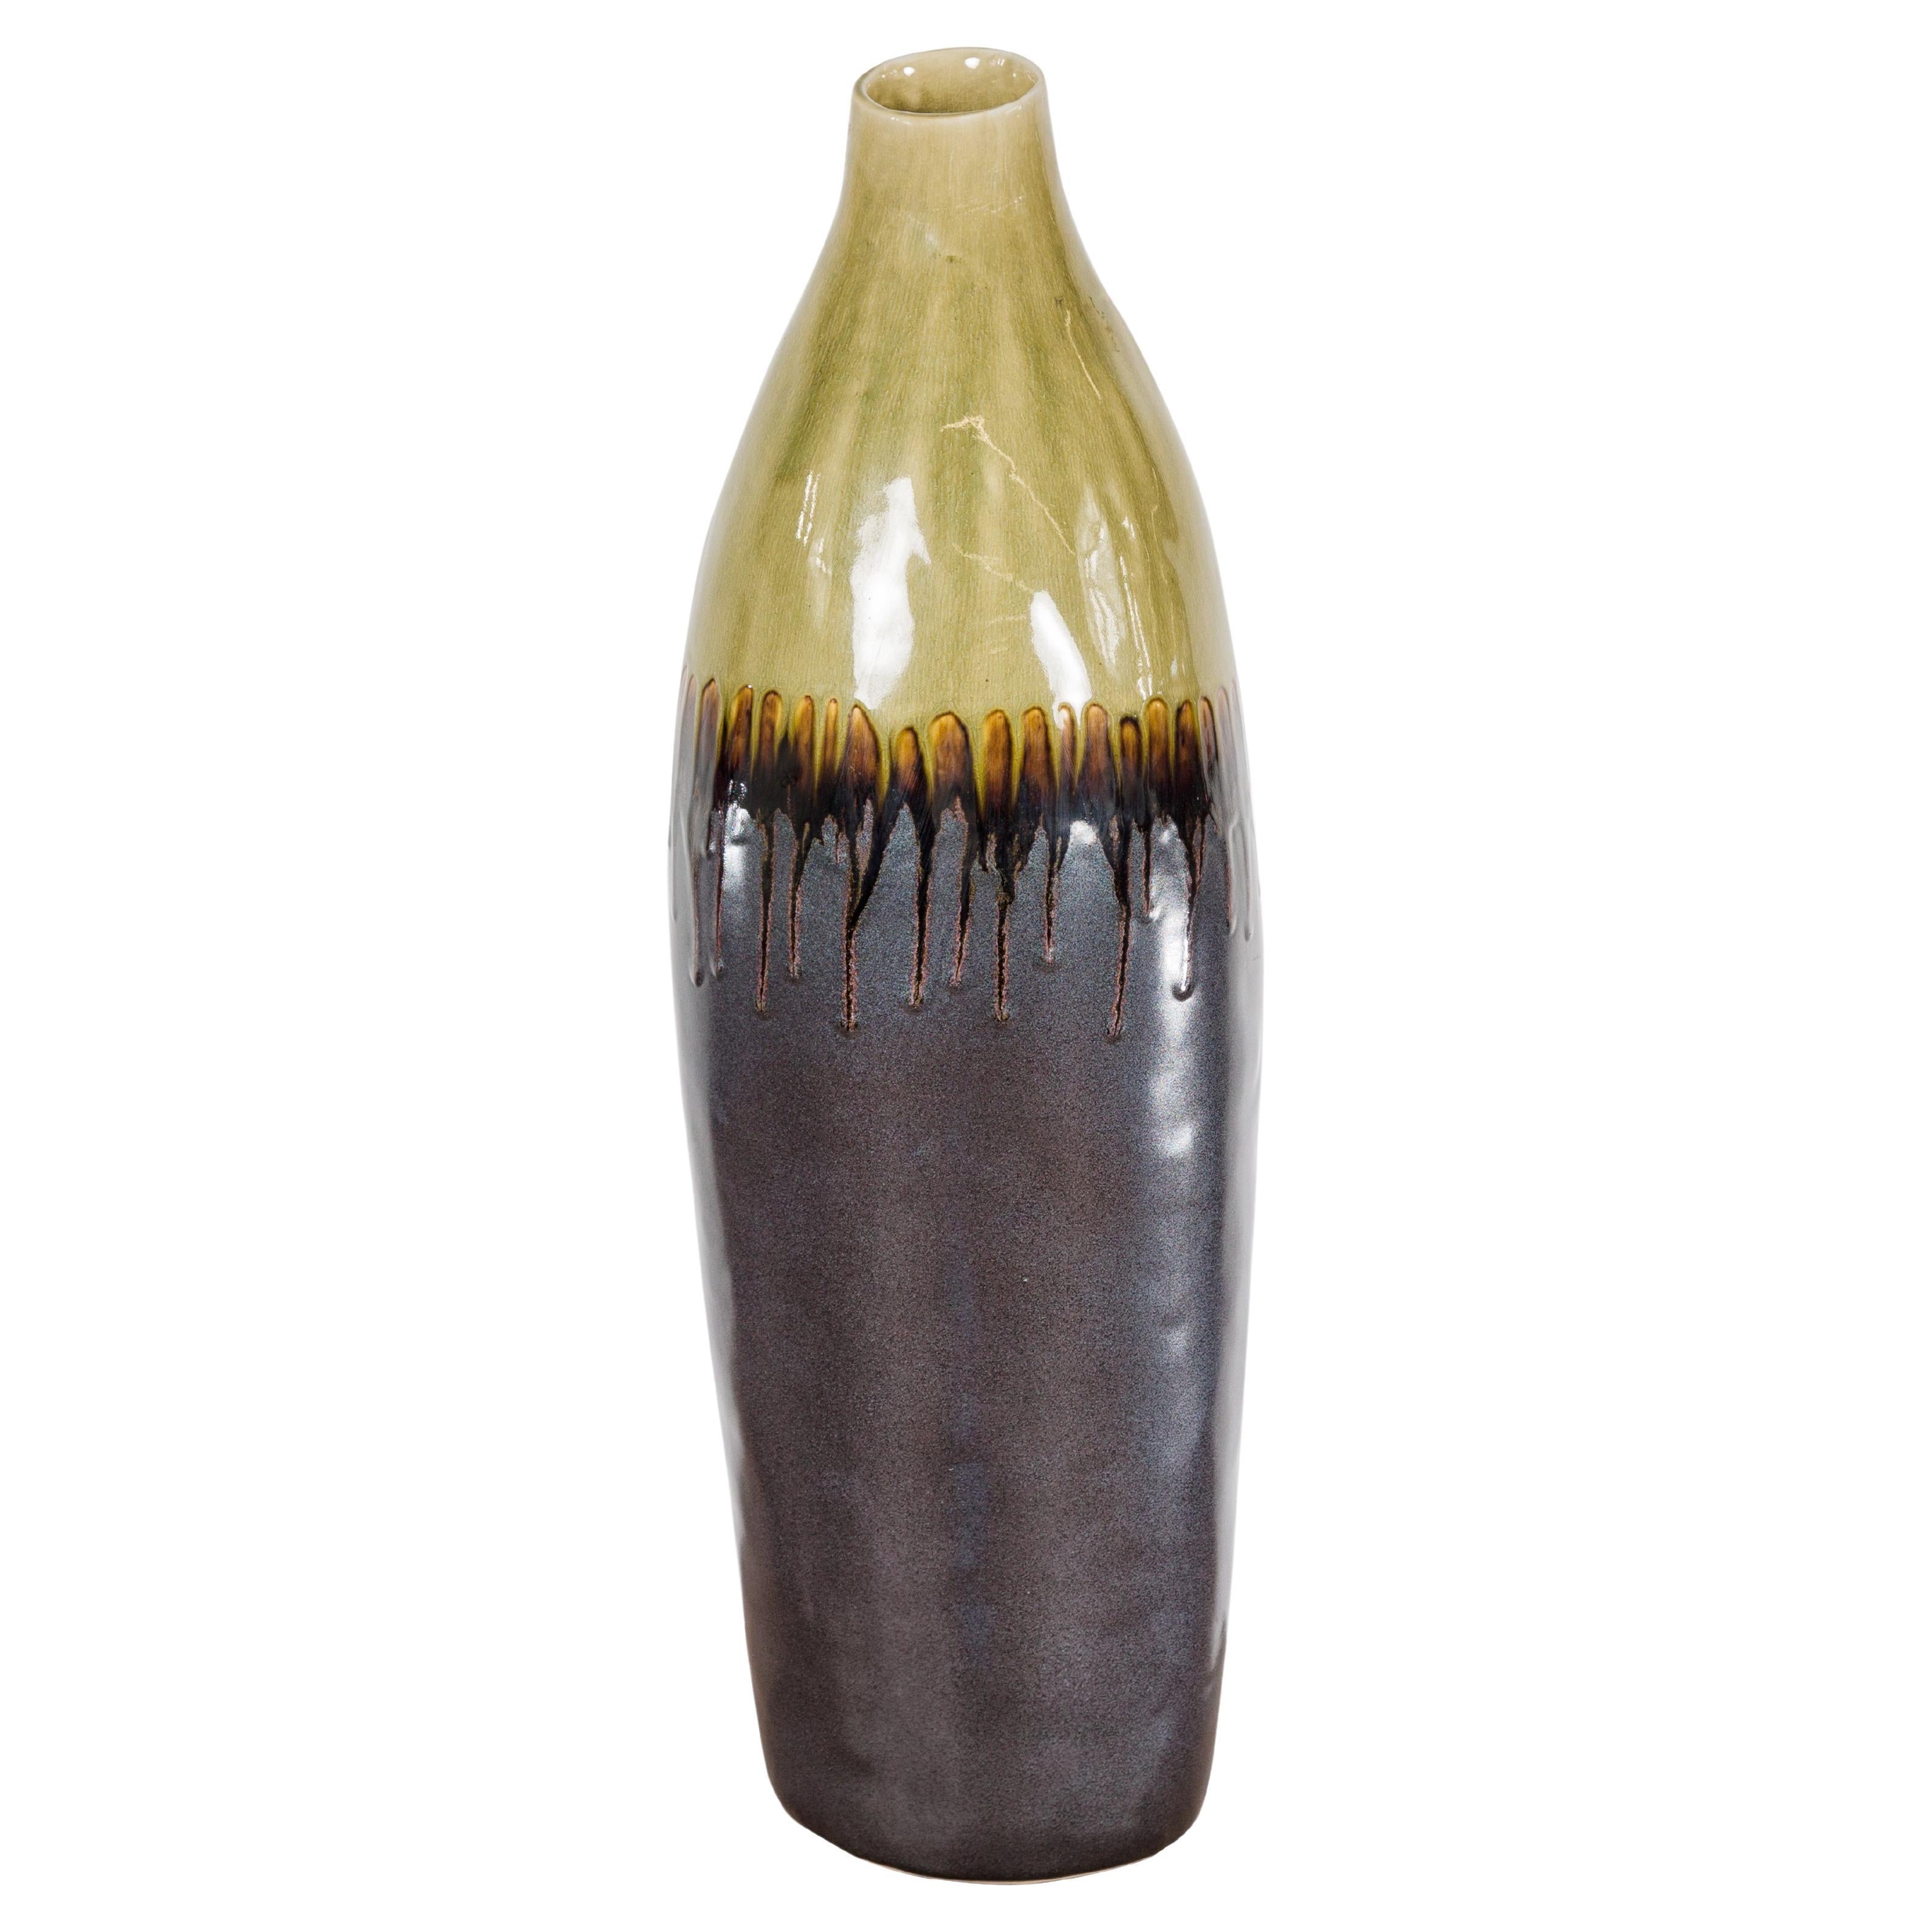 Handmade Artisan Ceramic Vase with Olive Green, Dark Grey and Brown Dripping